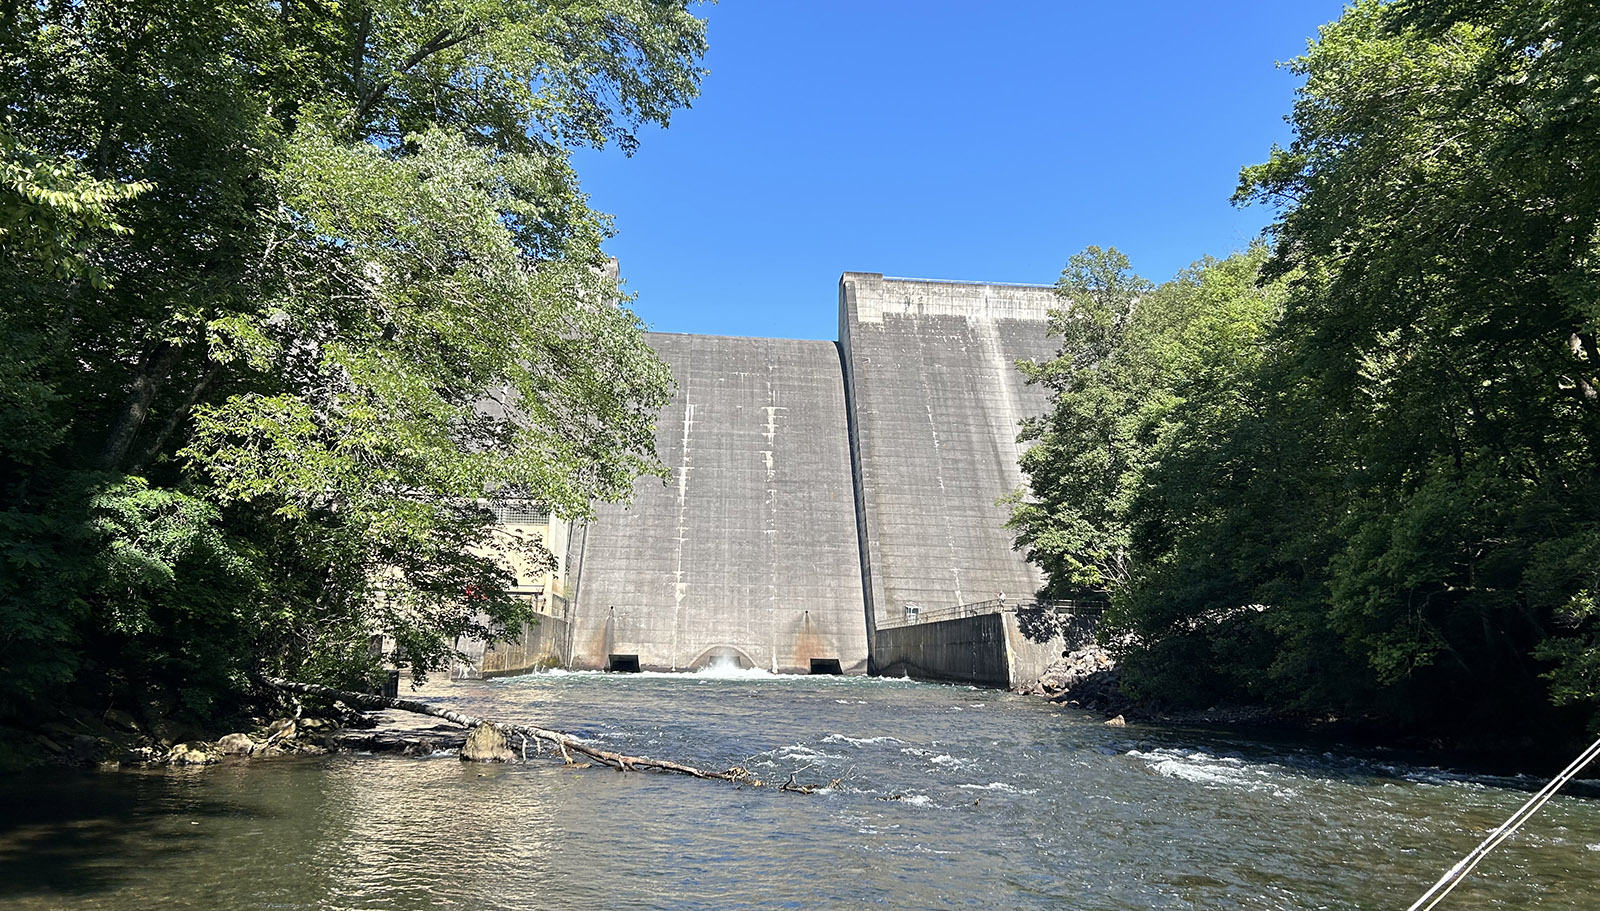 A photo of a tall, concrete dam taken from the river below it.